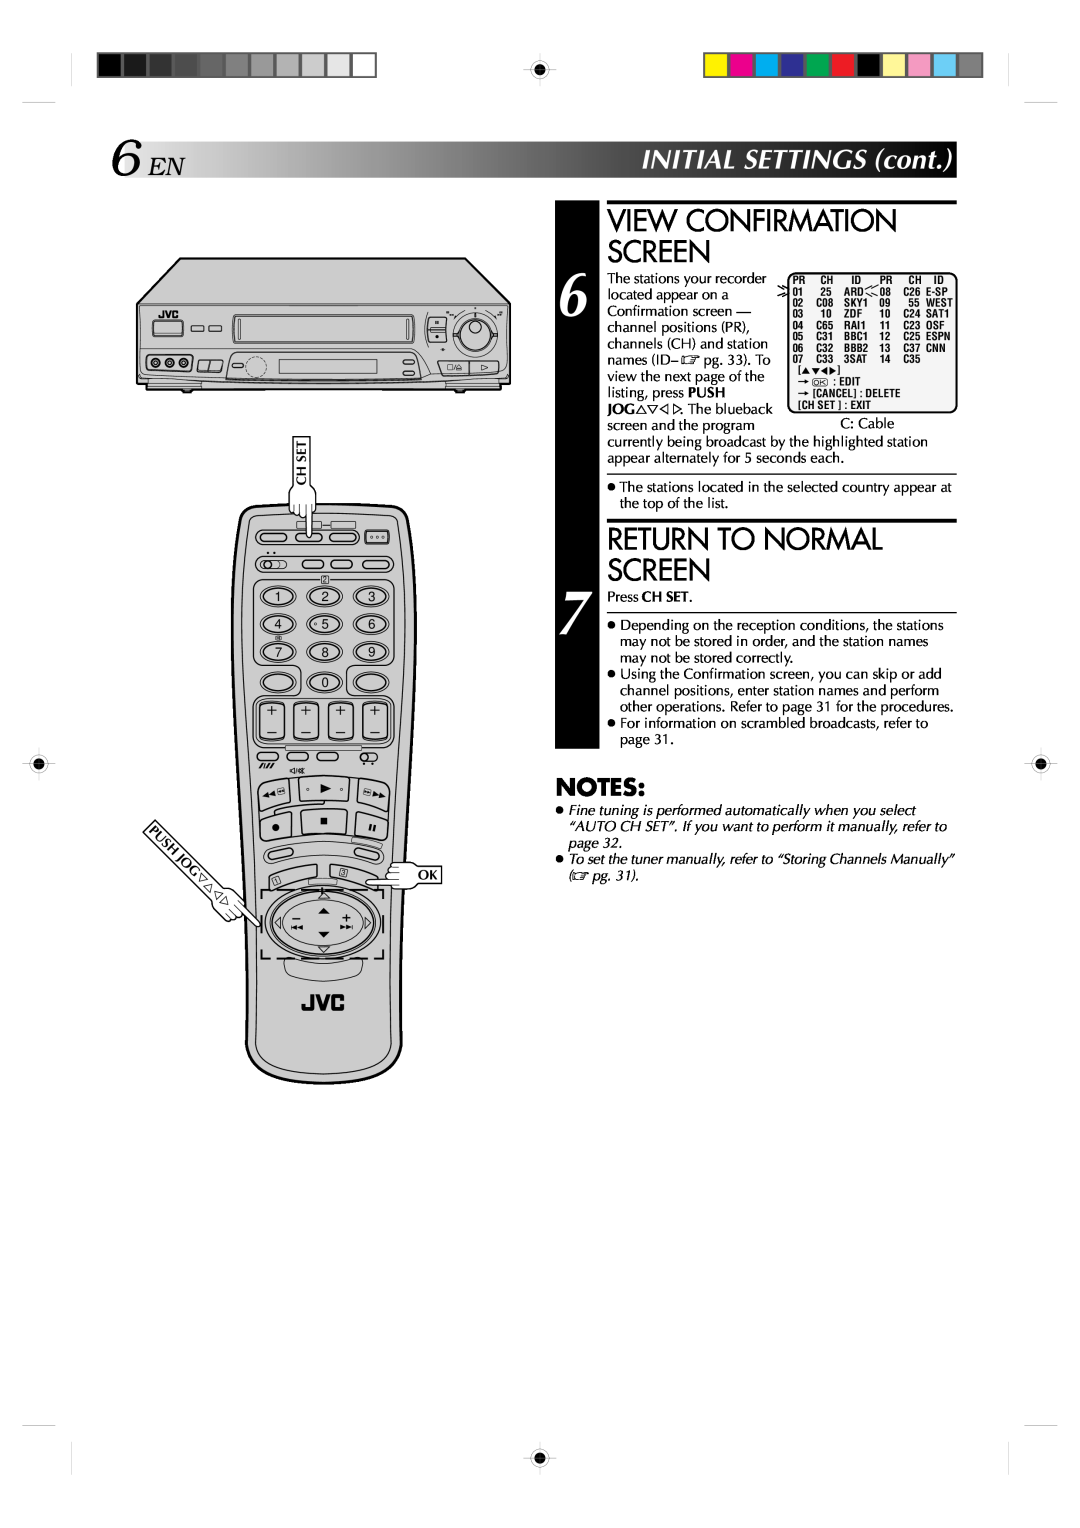 JVC HR-J638E/EH INITIALSETTINGScont, located appear on a, Confirmation screen, channel positions PR, names ID- pg. 33. To 